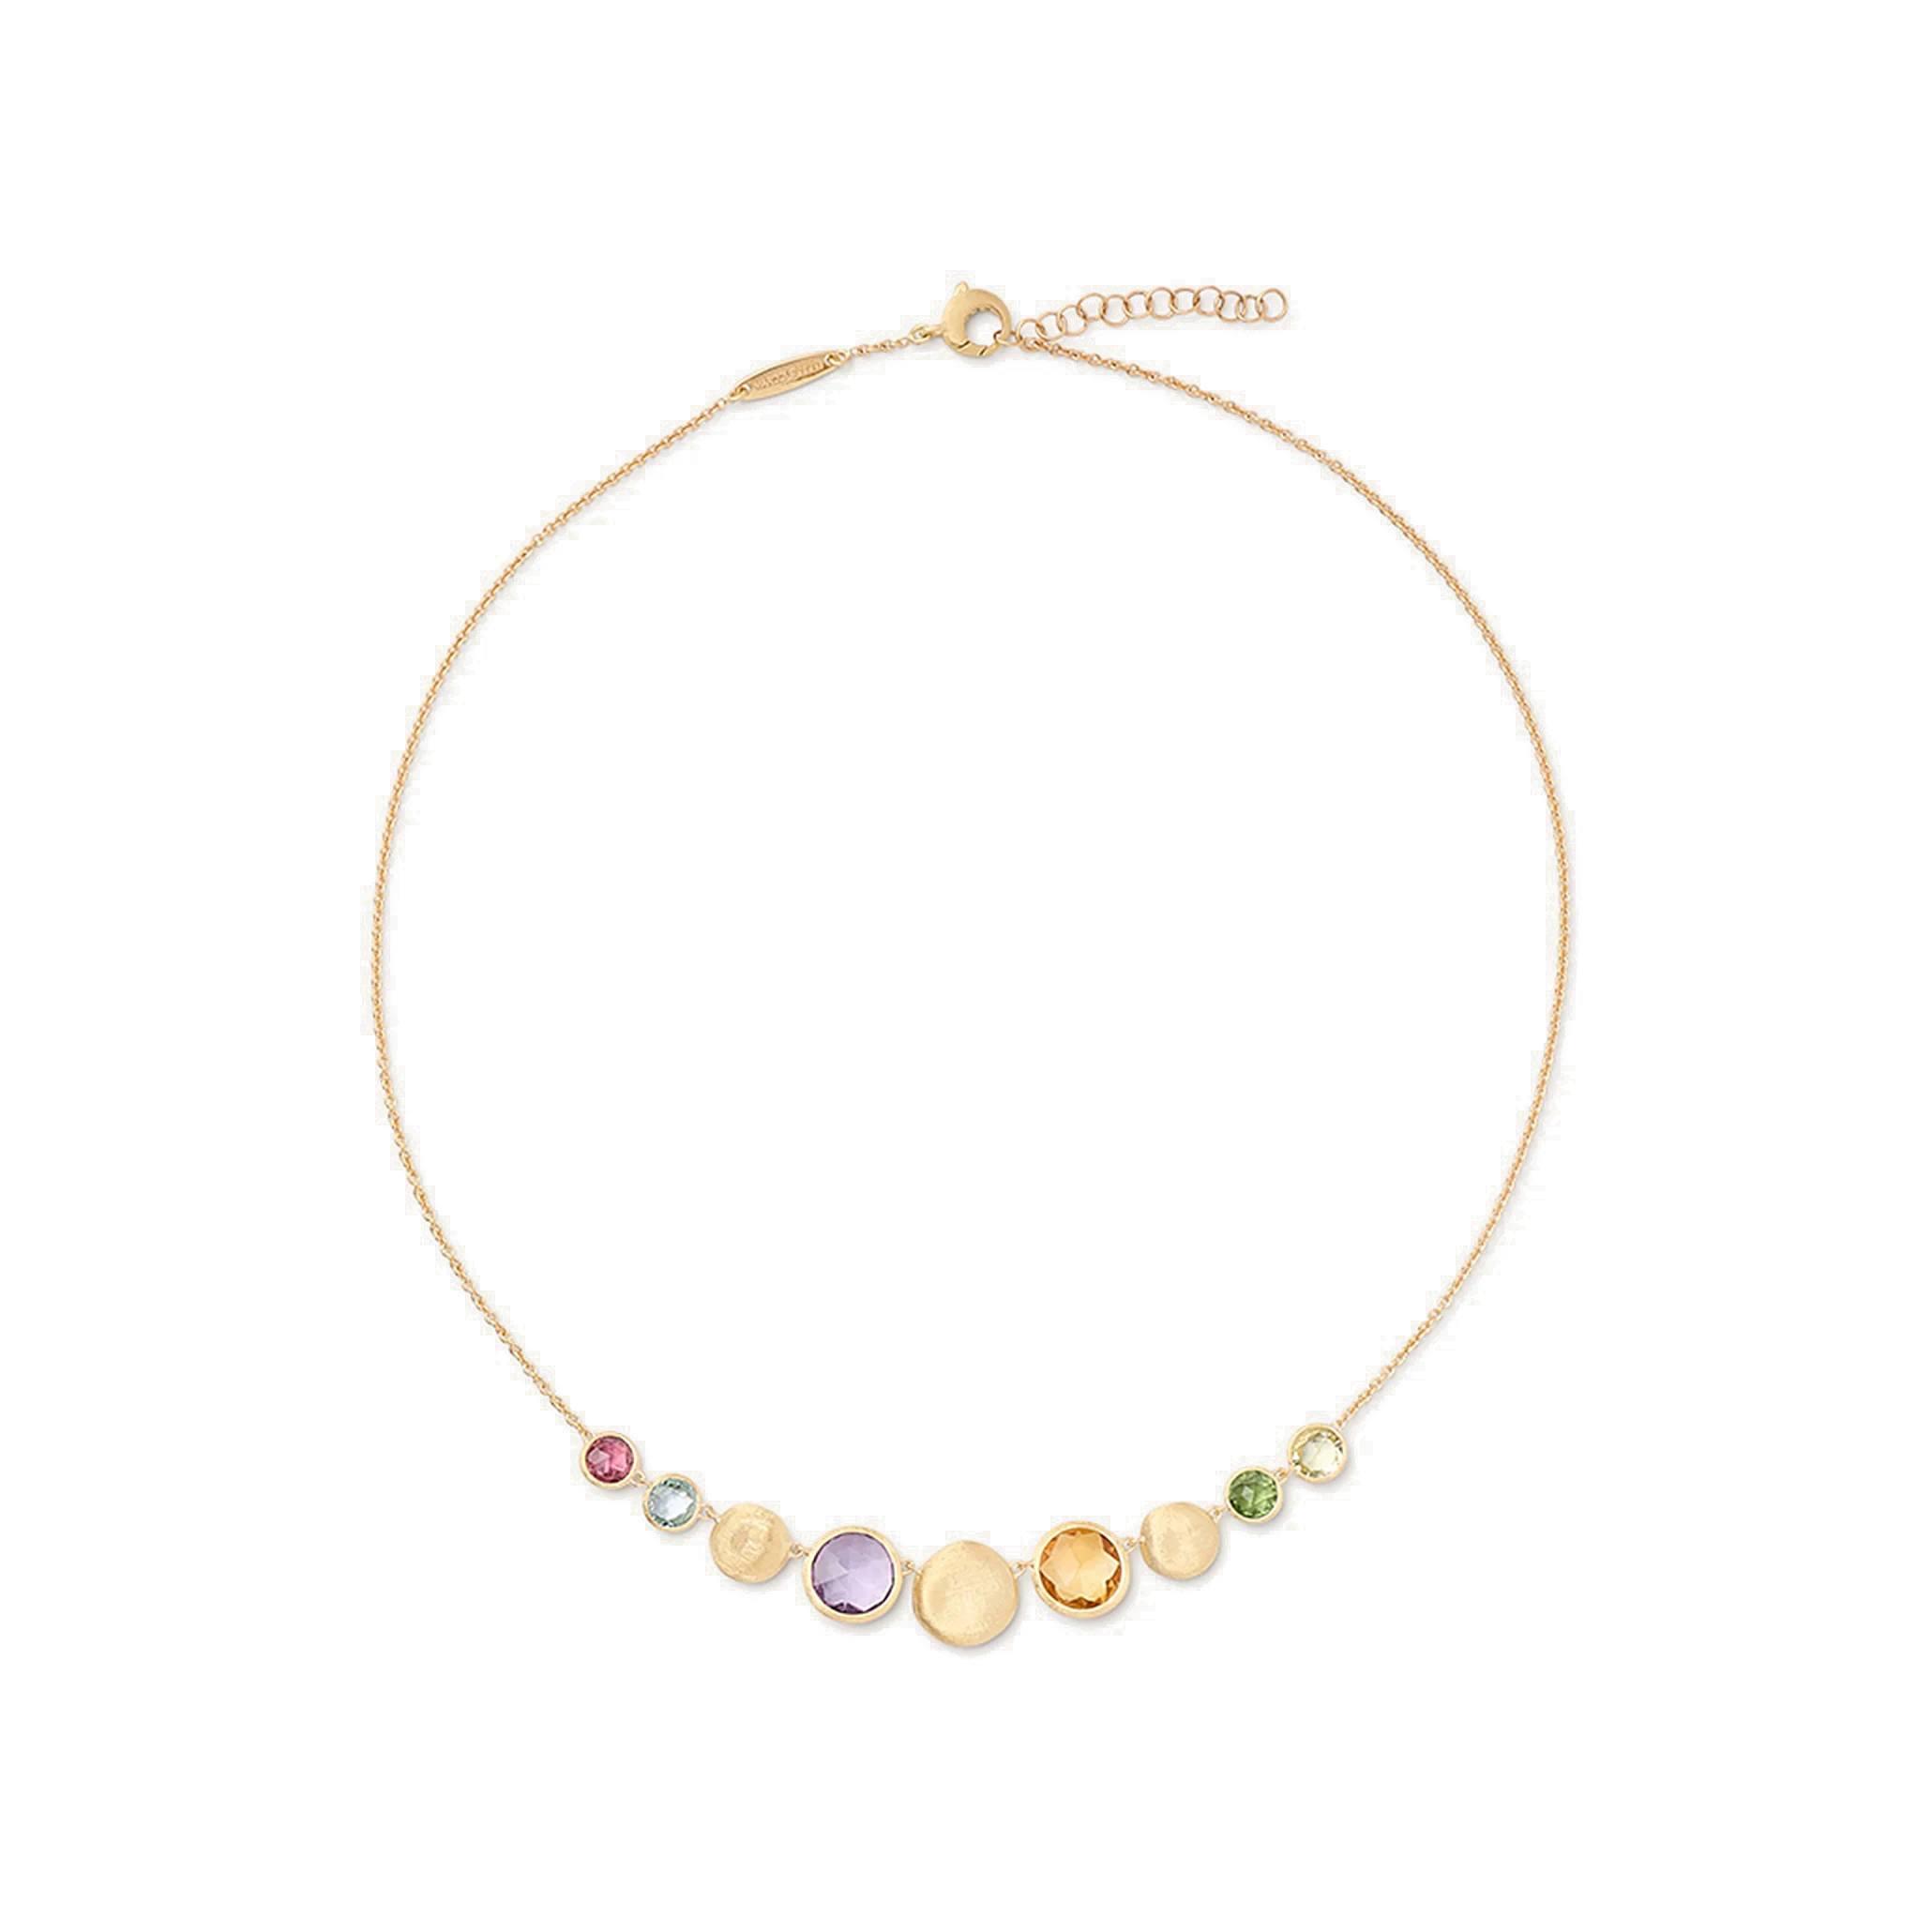 Marco Bicego Jaipur Color Mixed Stone Halfsie Necklace 3